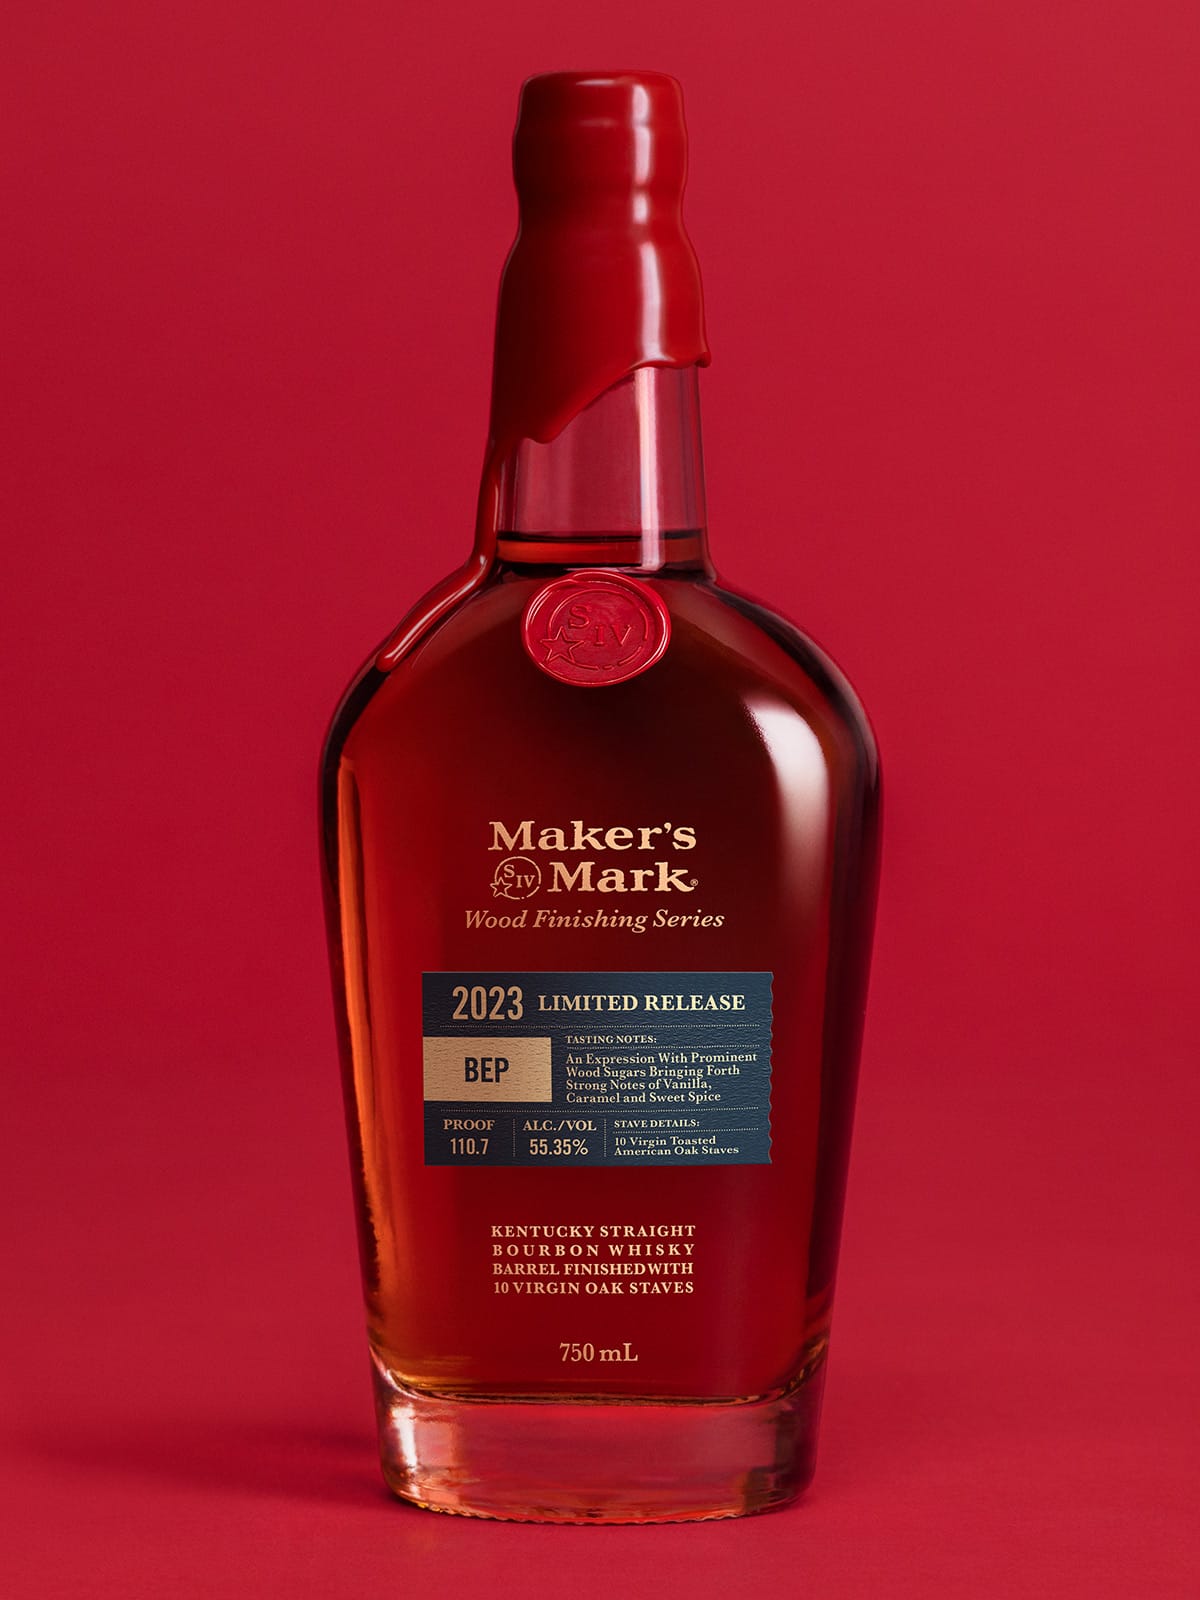 New Maker's Mark Wood Finishing Series Explores Barrel Entry Proof